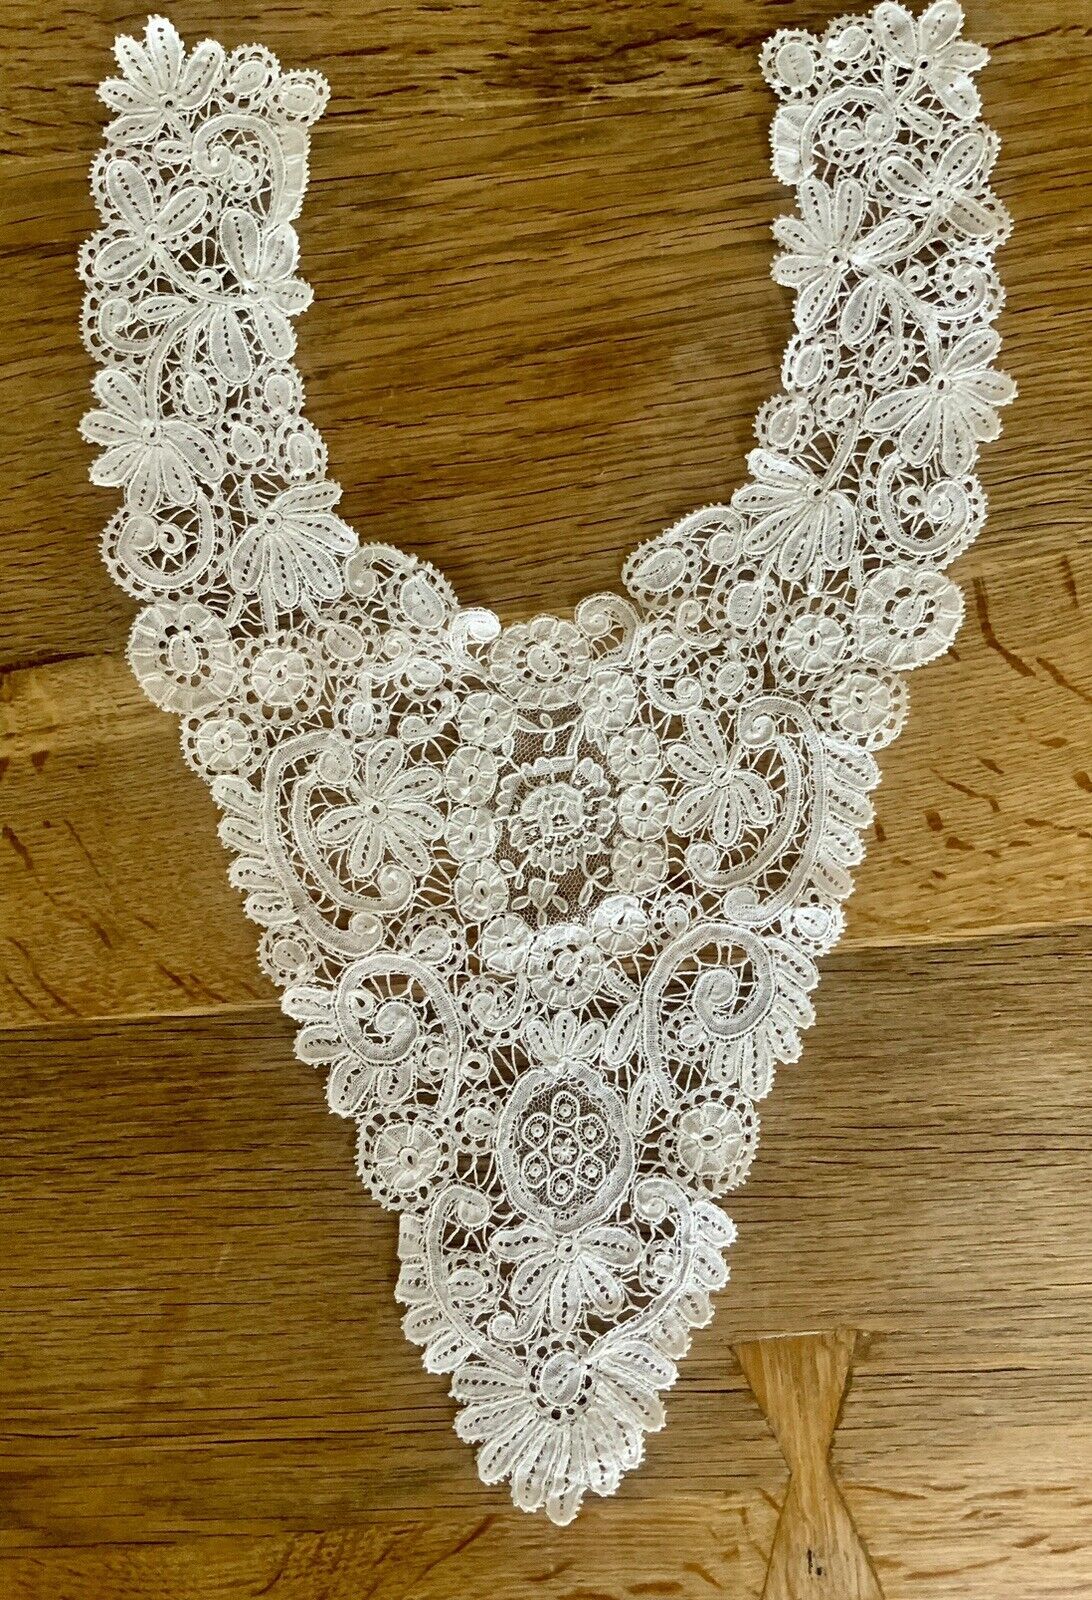 Antique Collar Cleavage - Handmade Lace - 1900 Edwardian Collar